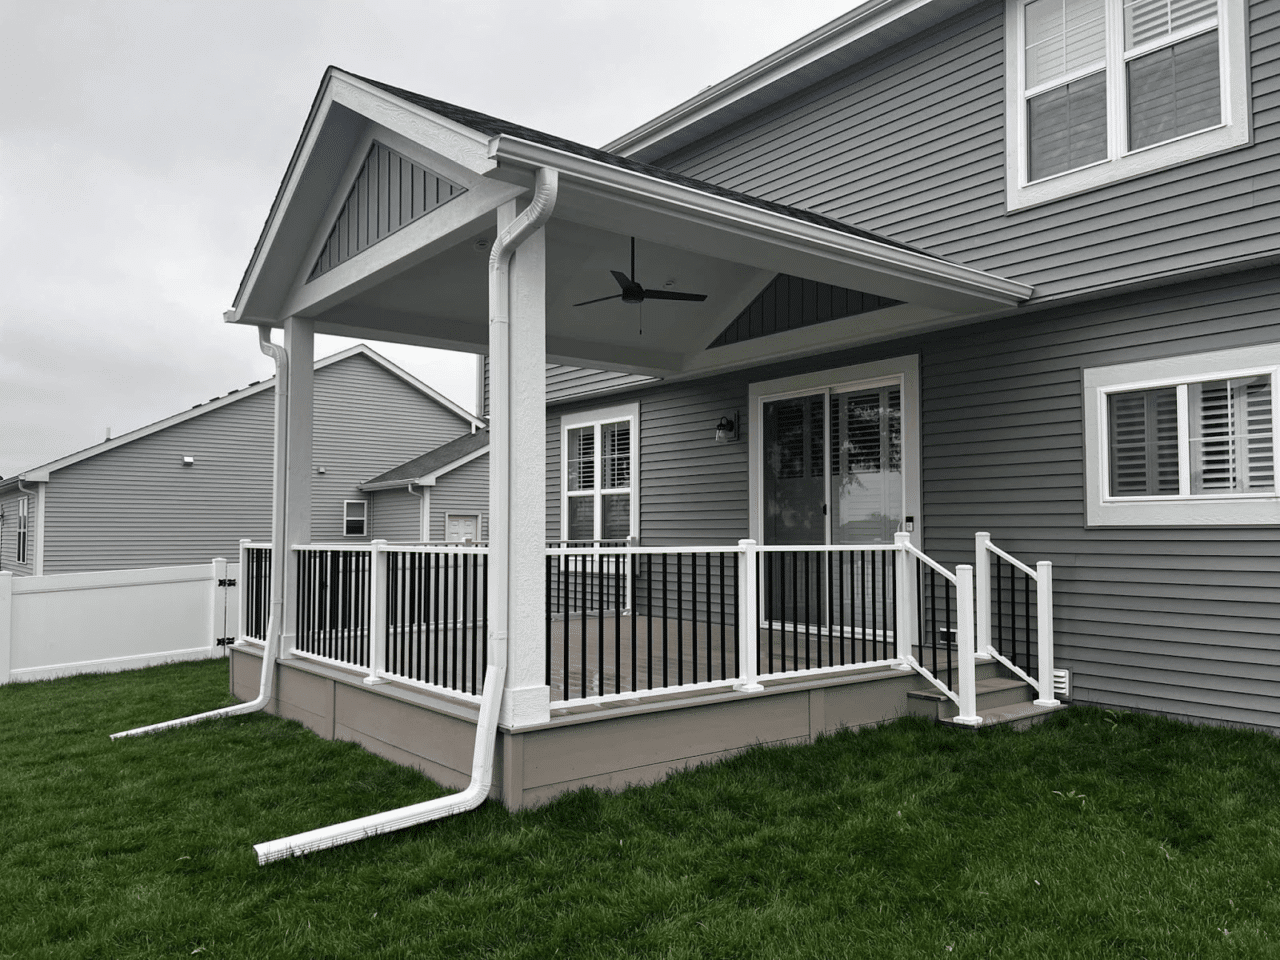 Covered Porch Options - Custom Covered Porch builder and contractor Washington County, WI